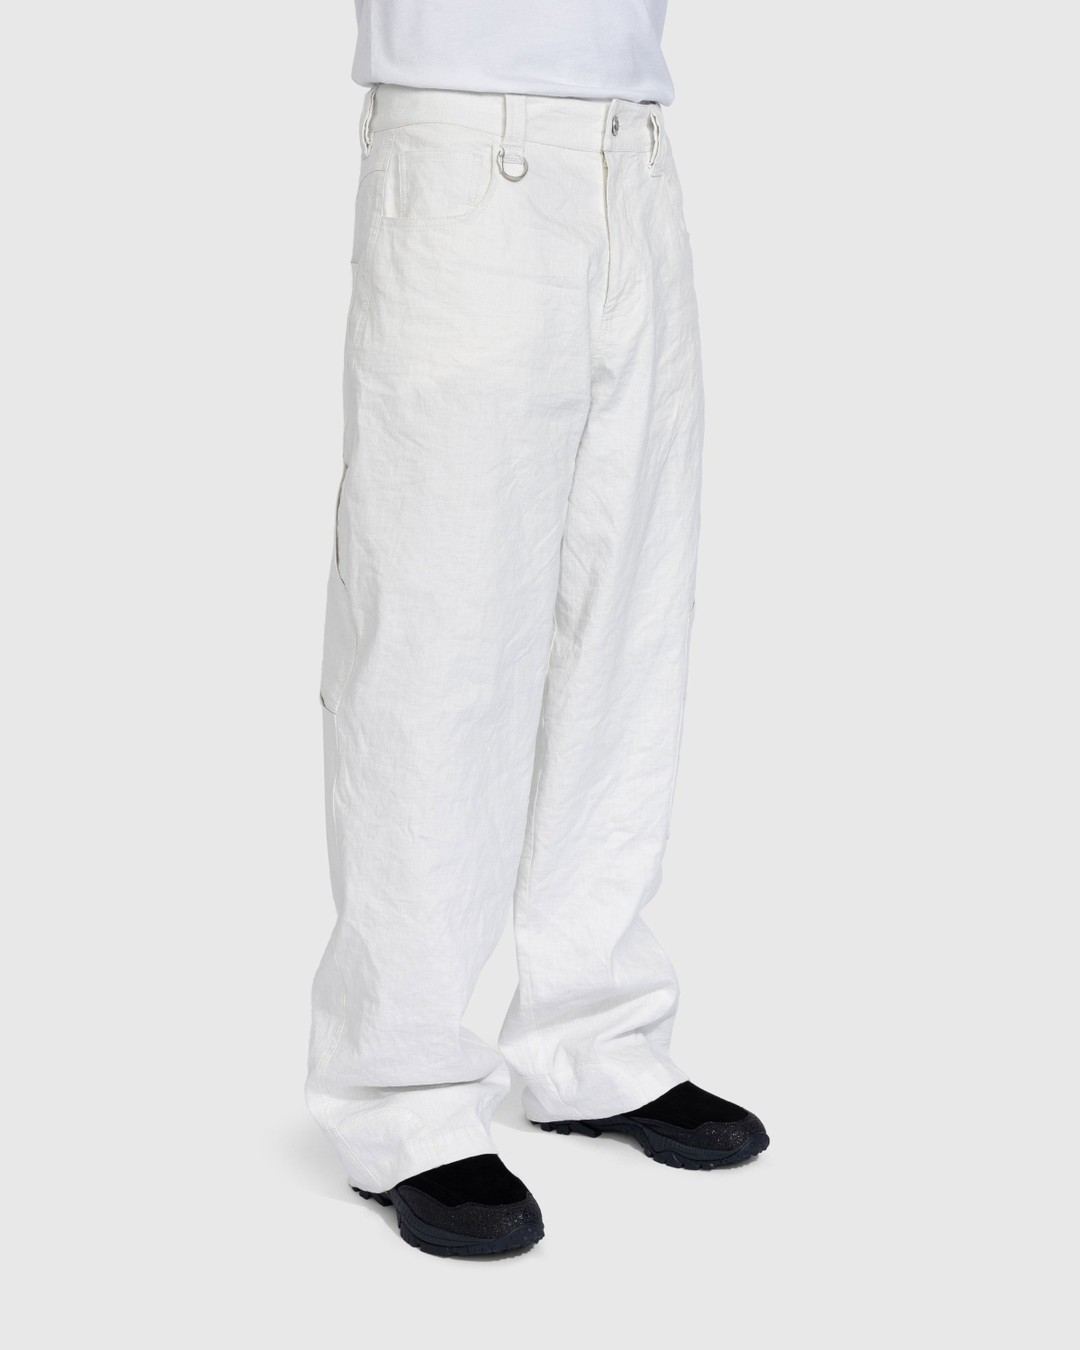 Trussardi – Wrinkled Cotton Trousers White - Pants - White - Image 3